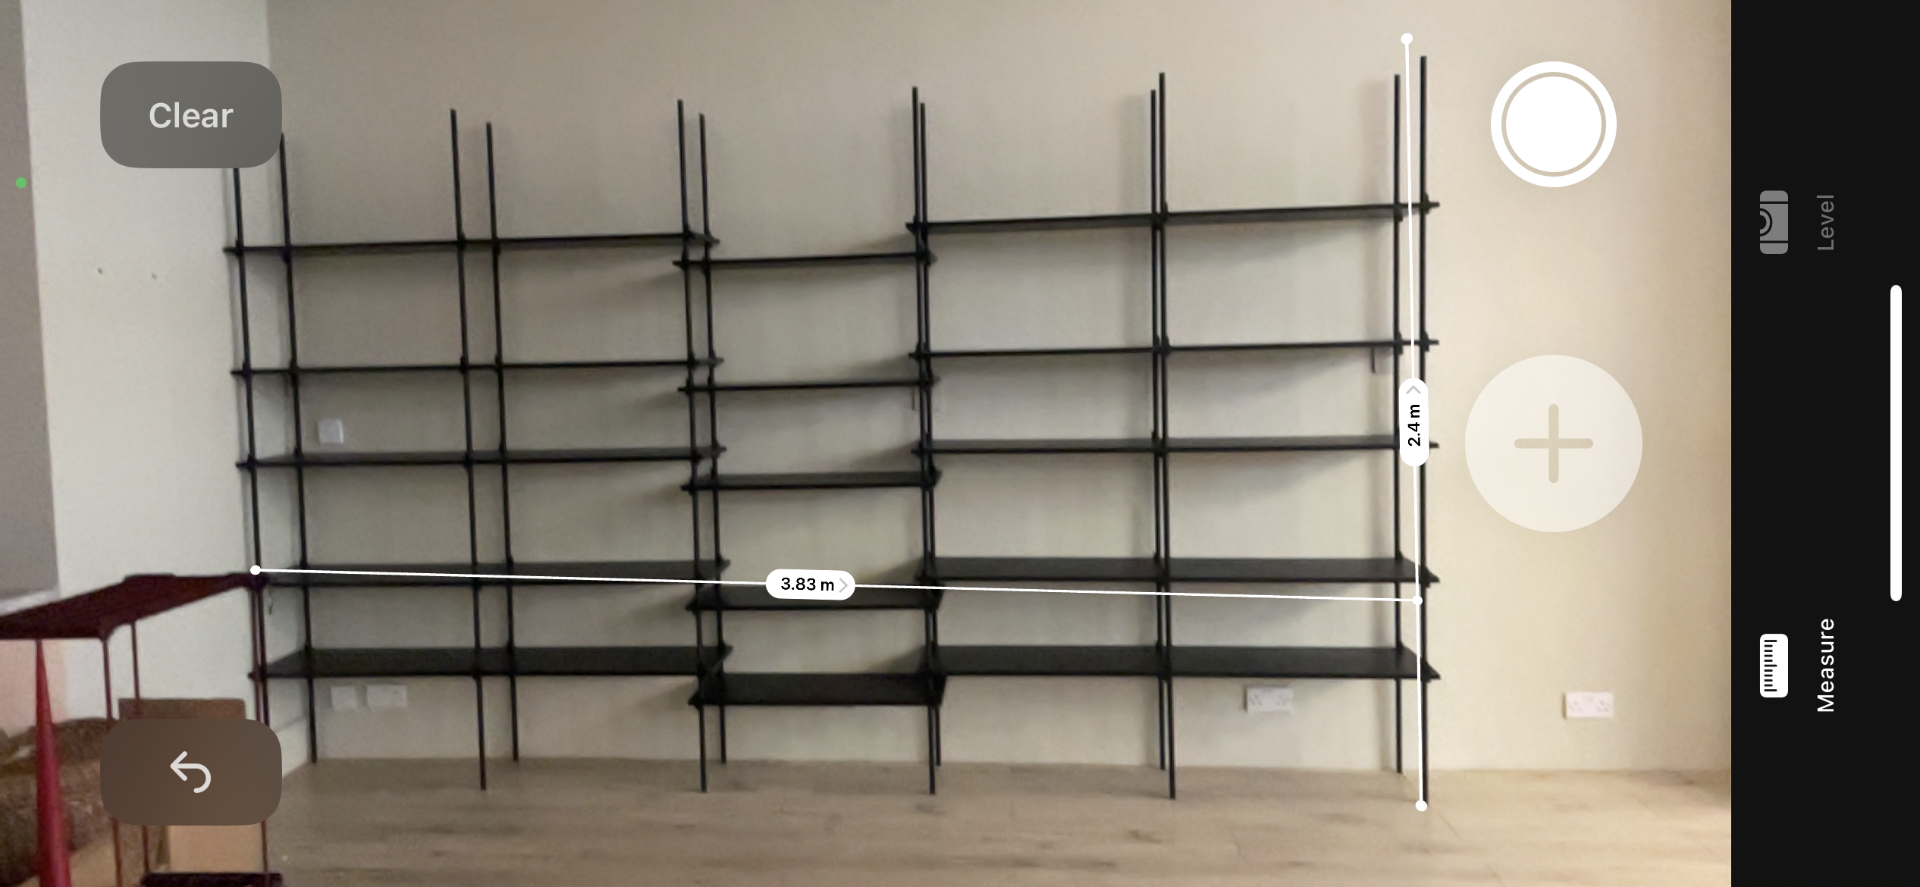 2 x 25 Tier Adjustable Shelving Units in Brown & Black | Dismantled for transit | CONTENTS NOT INCLU - Image 9 of 11